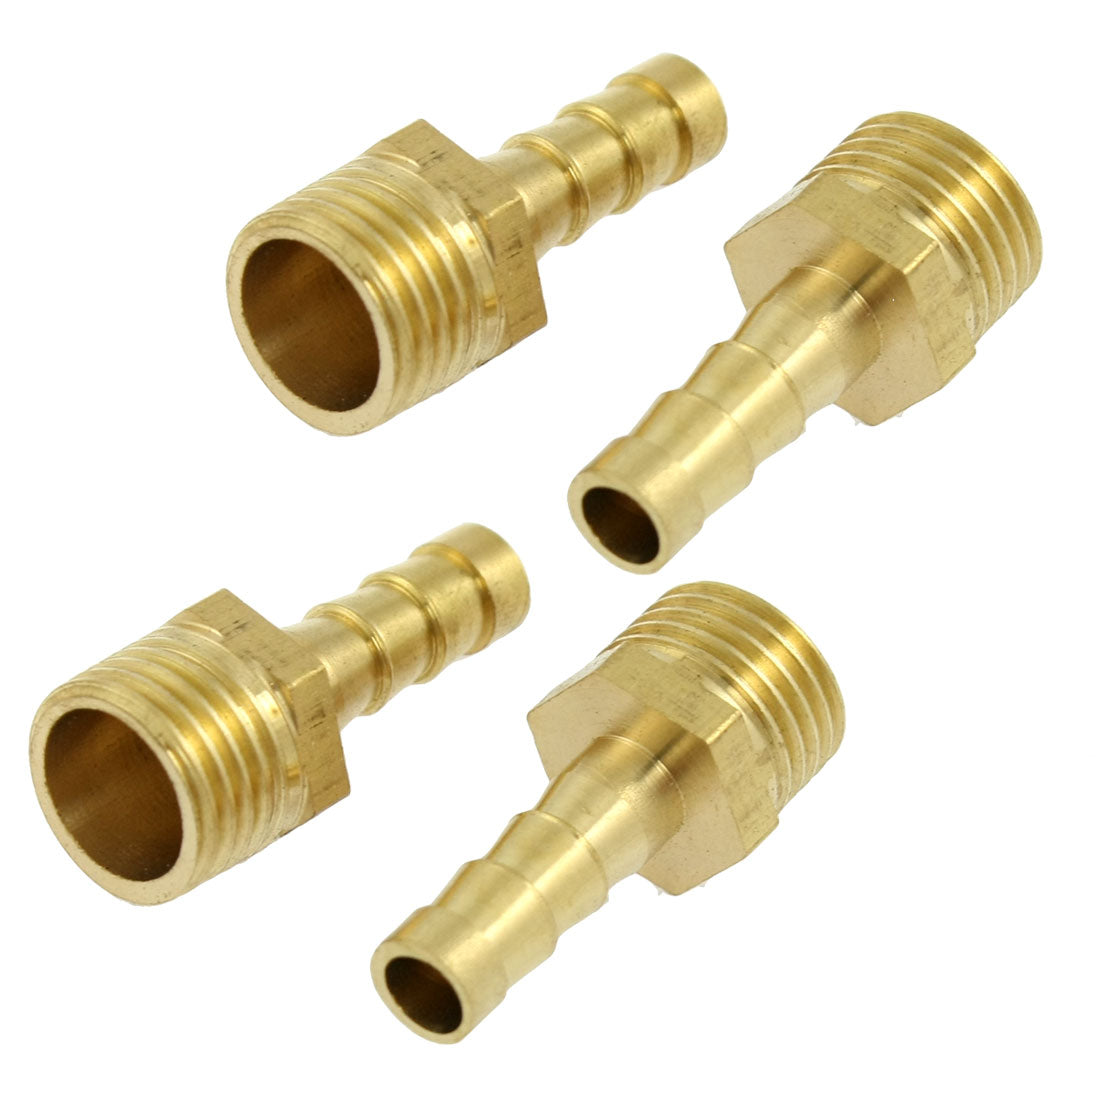 uxcell Uxcell 5 Pcs Brass 1/4" PT Thread 1/4" Air Gas Hose Barb Fitting Coupler Adapter Fit 6.5mm Inner Dia Tube